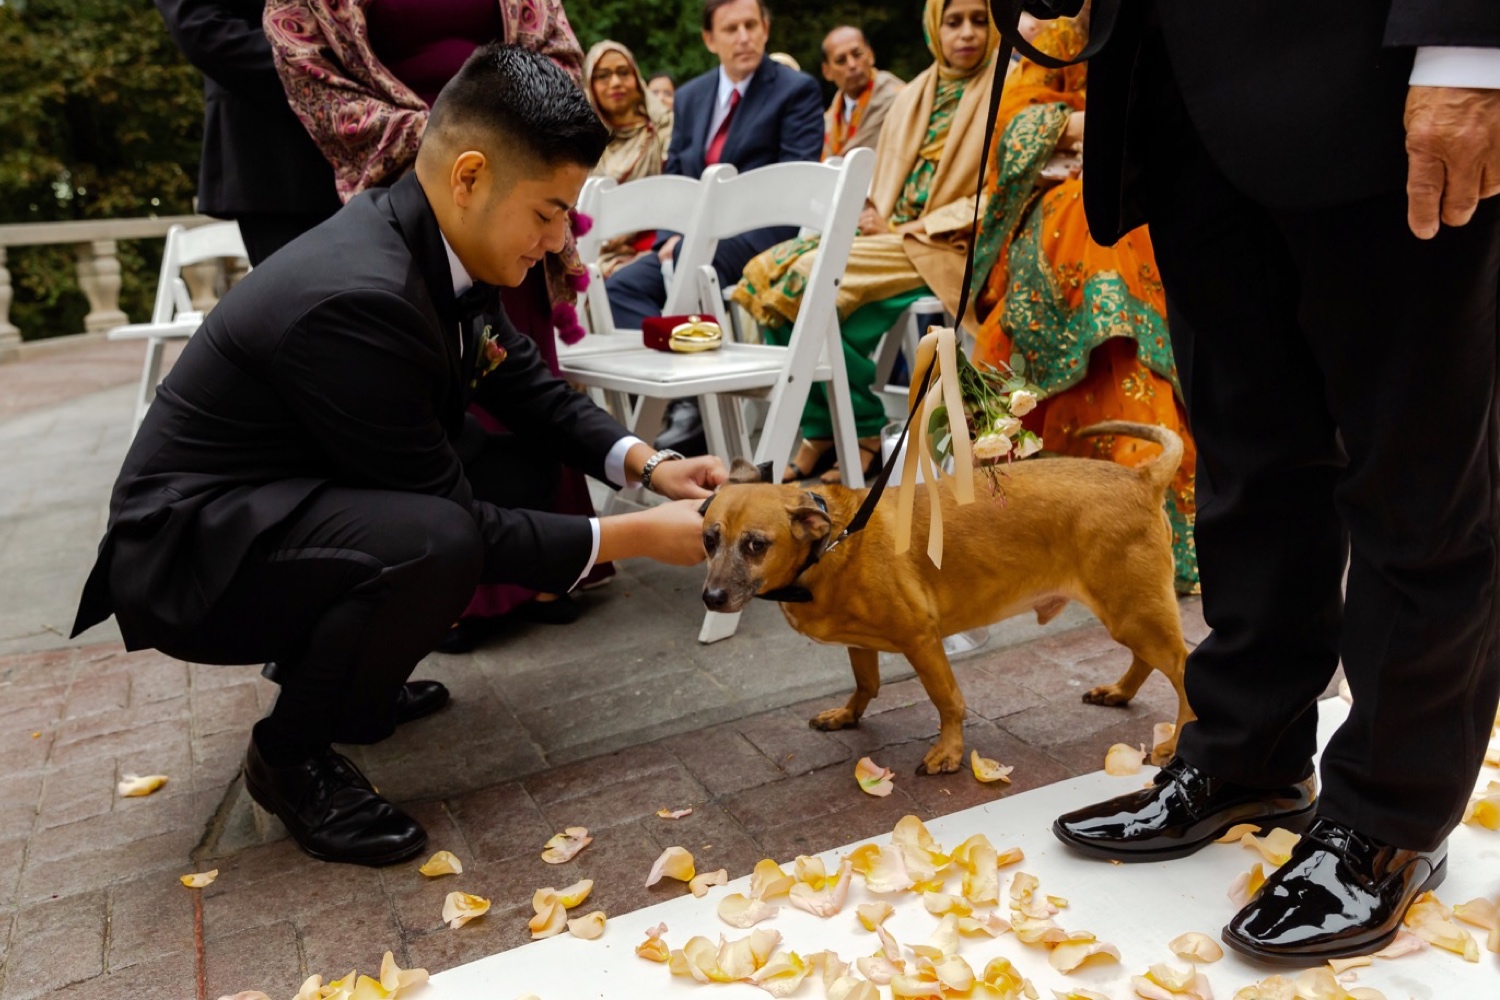 One groomsman taking out a wedding ring from a dog at the Tappan Hill Mansion.